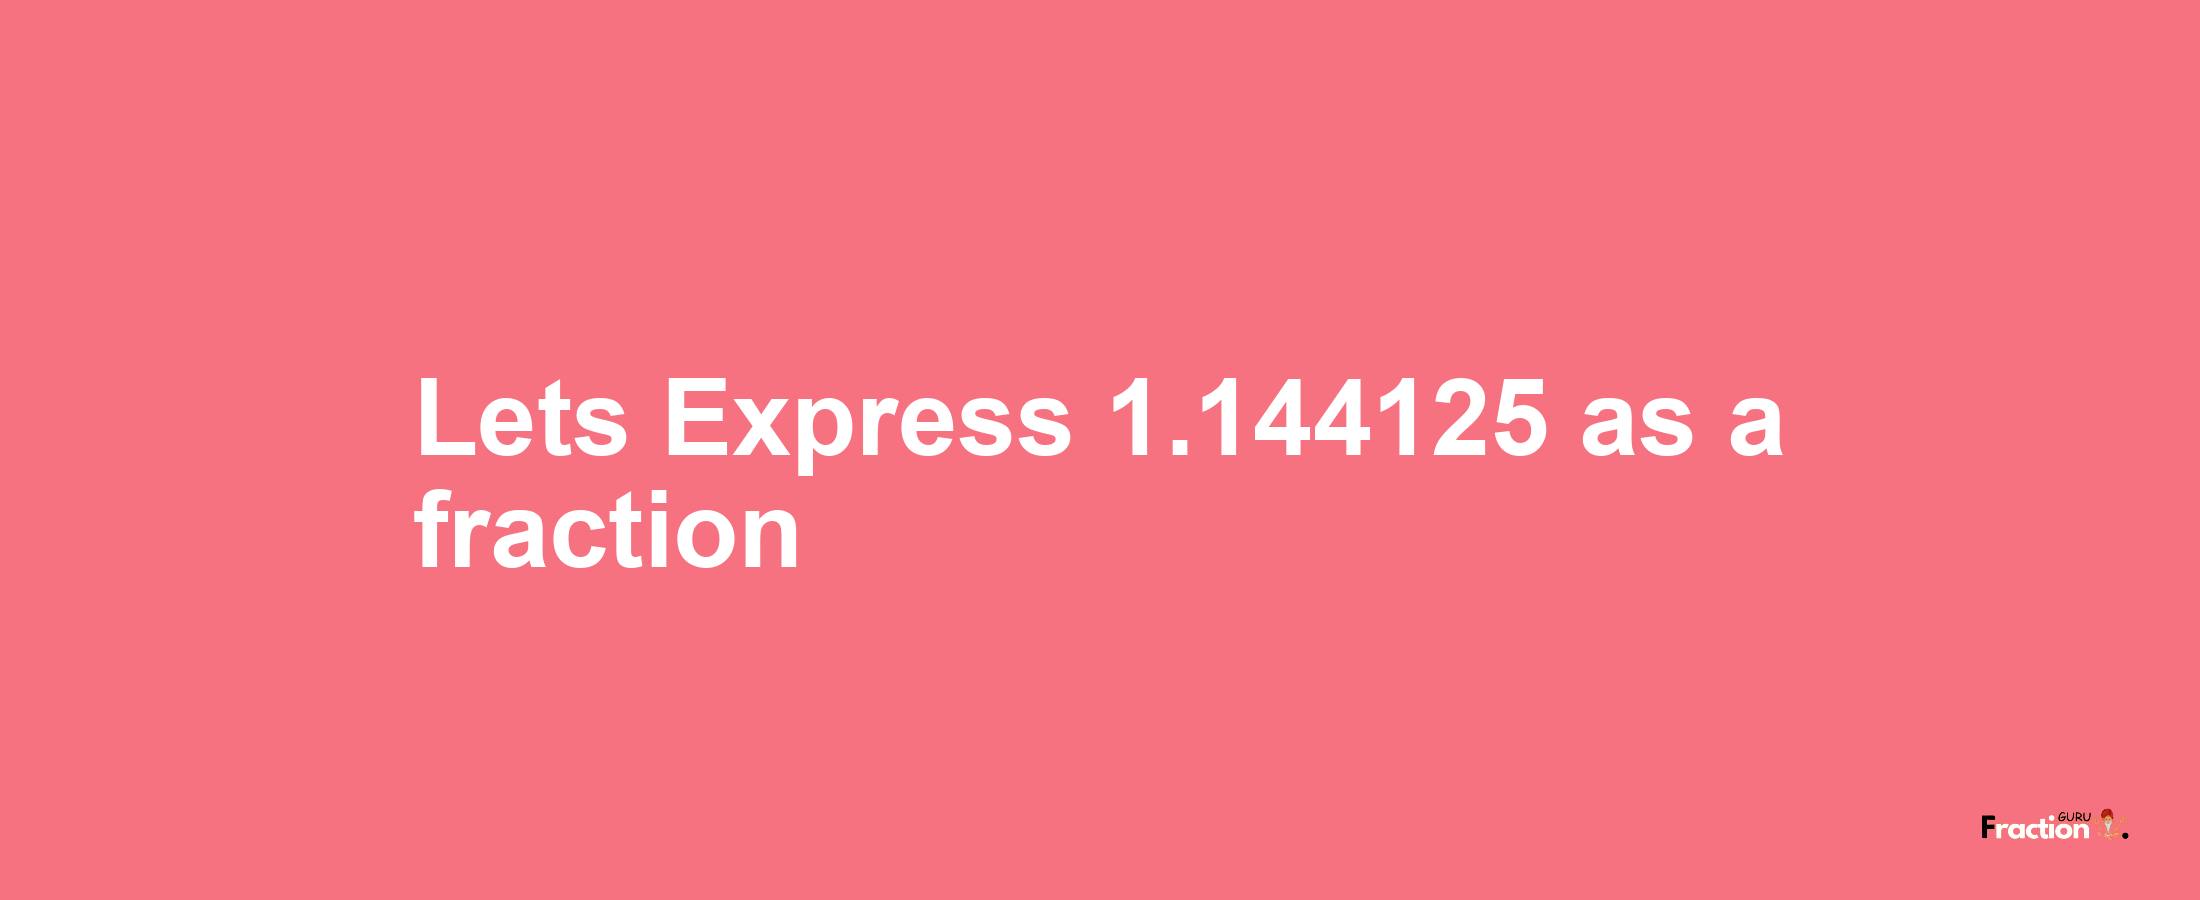 Lets Express 1.144125 as afraction